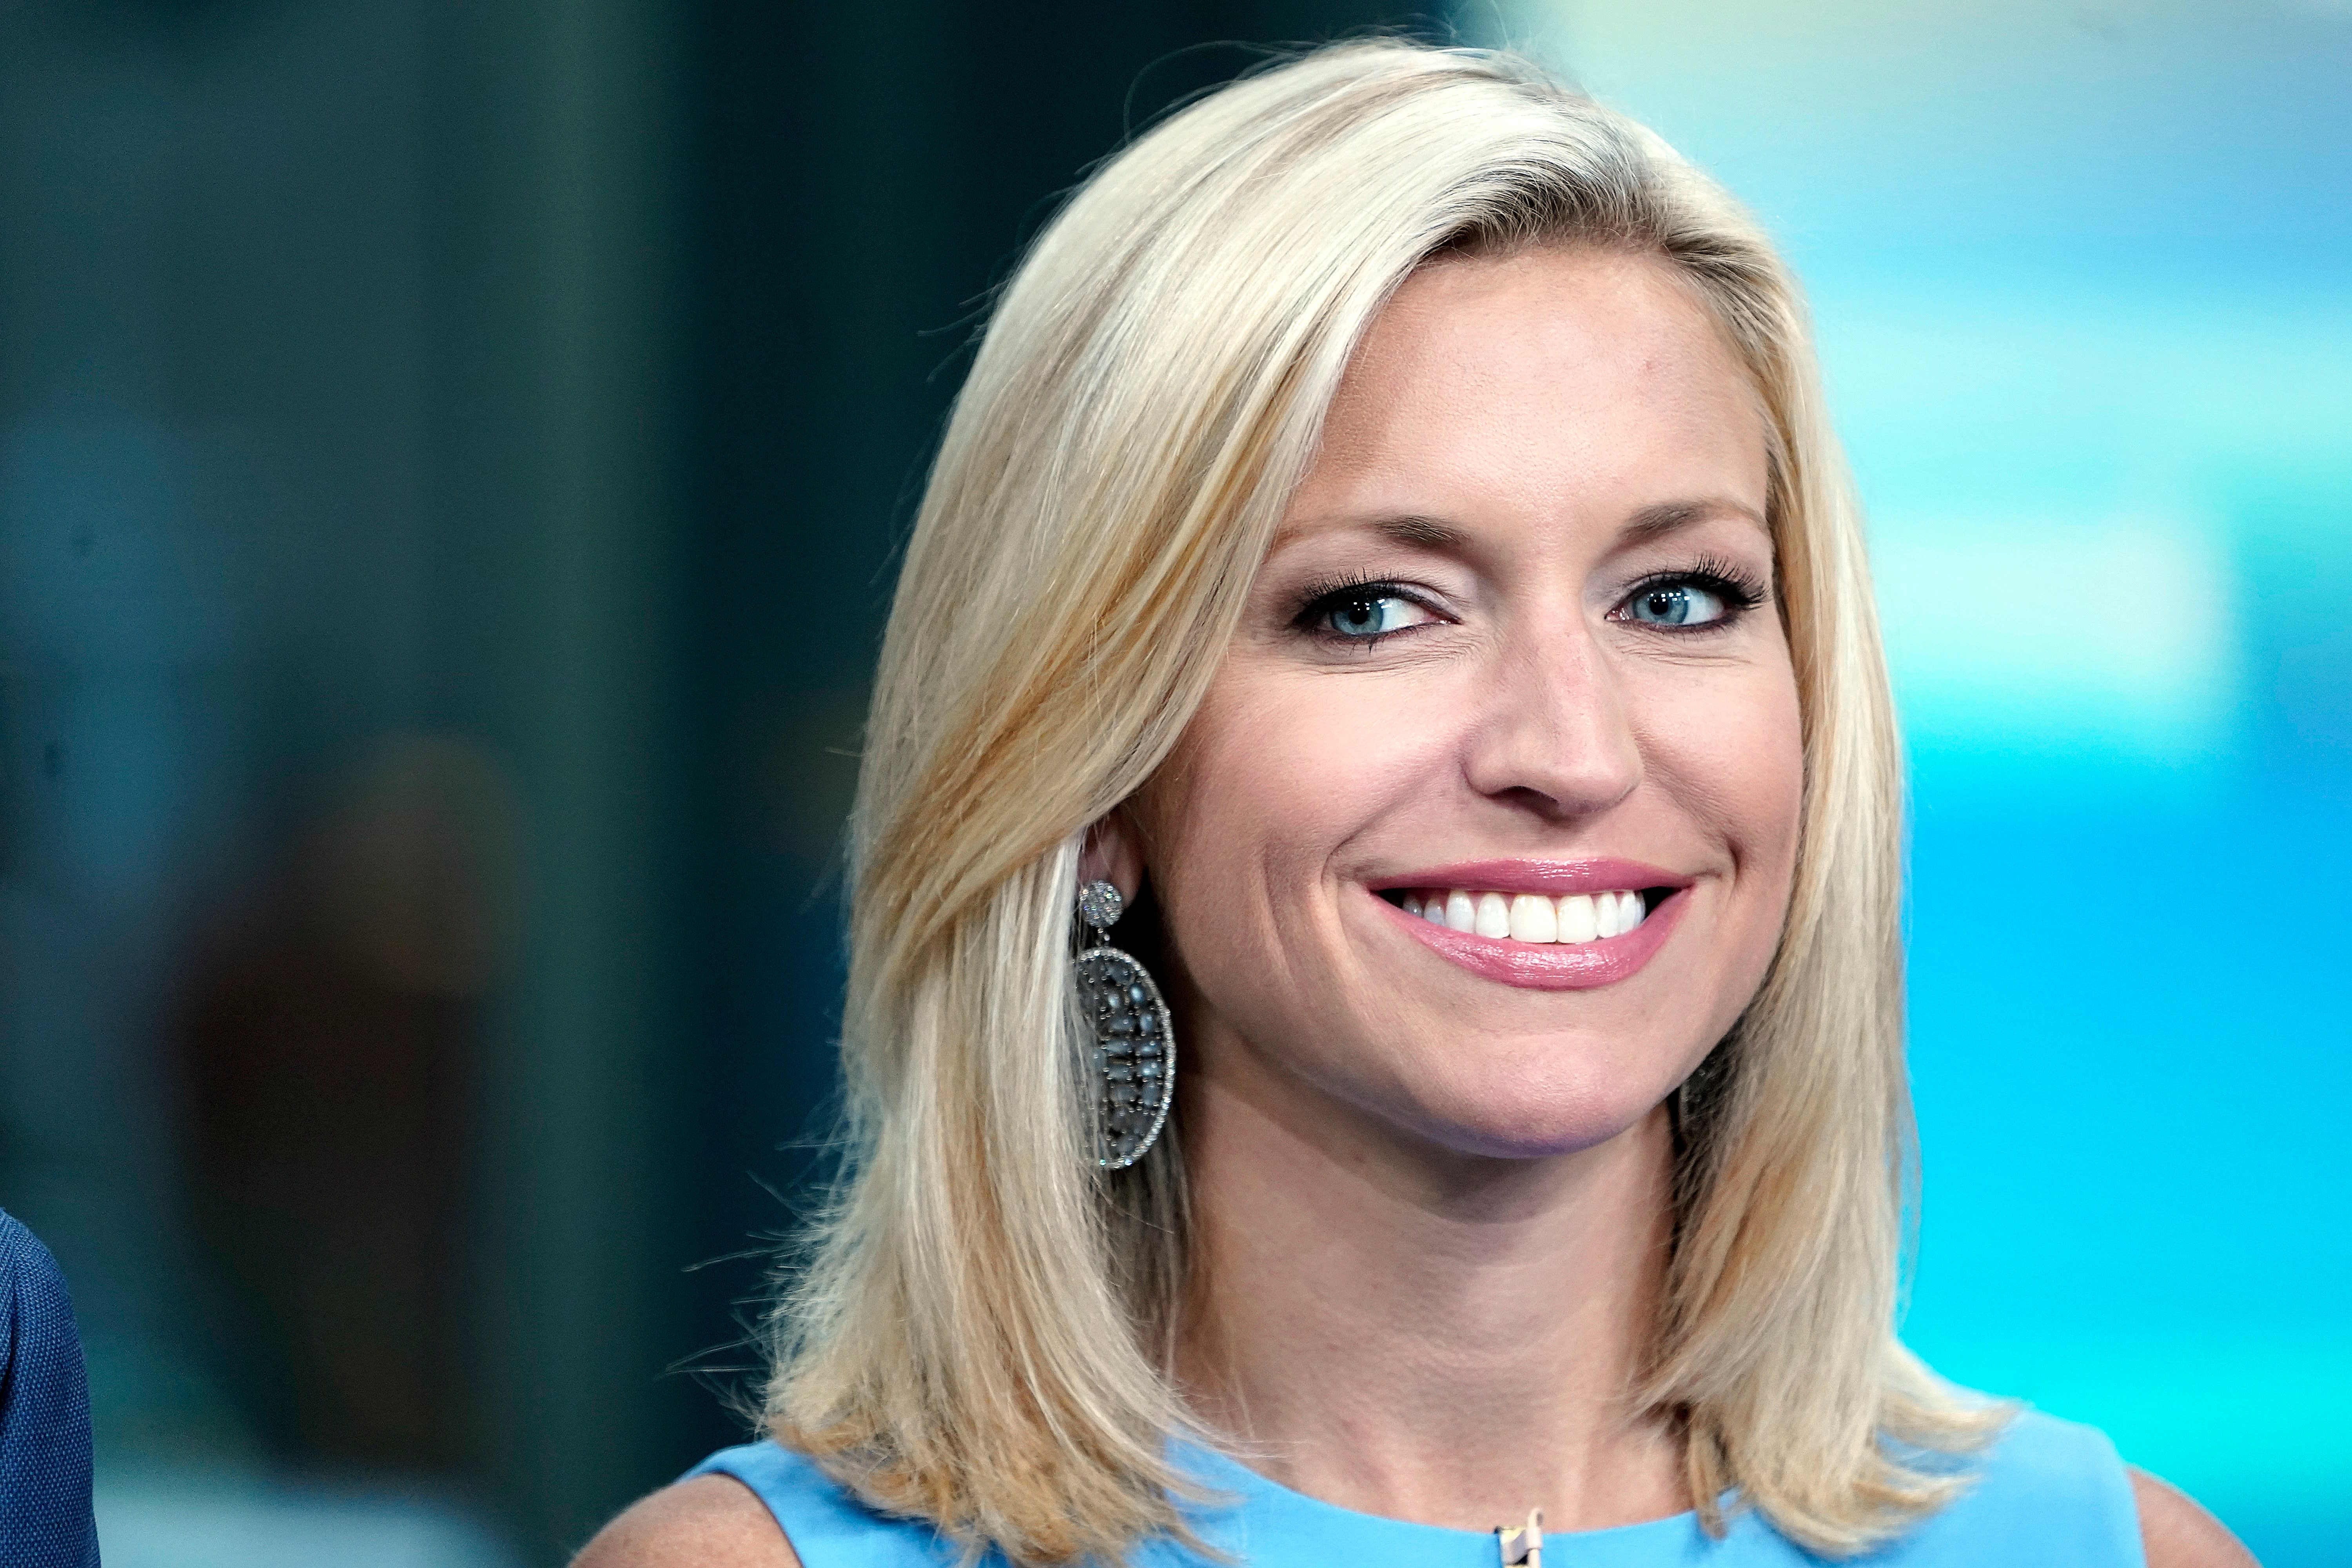 Fox News Host Hopes Trump's New Immigration Ban Doesn't Affect Nannies